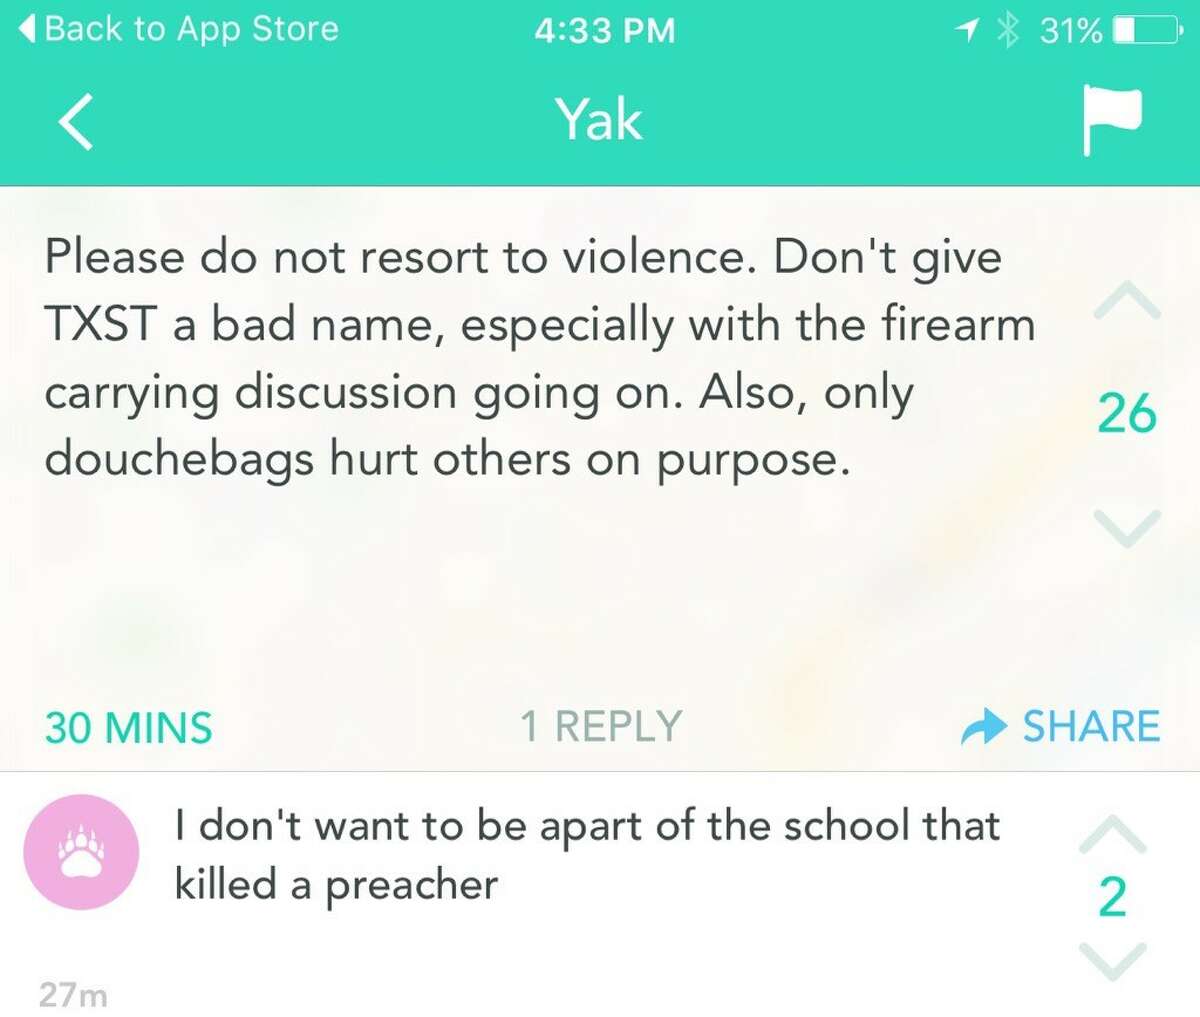 Texas State University students respond to a threatening post made of the mobile application Yik Yak.